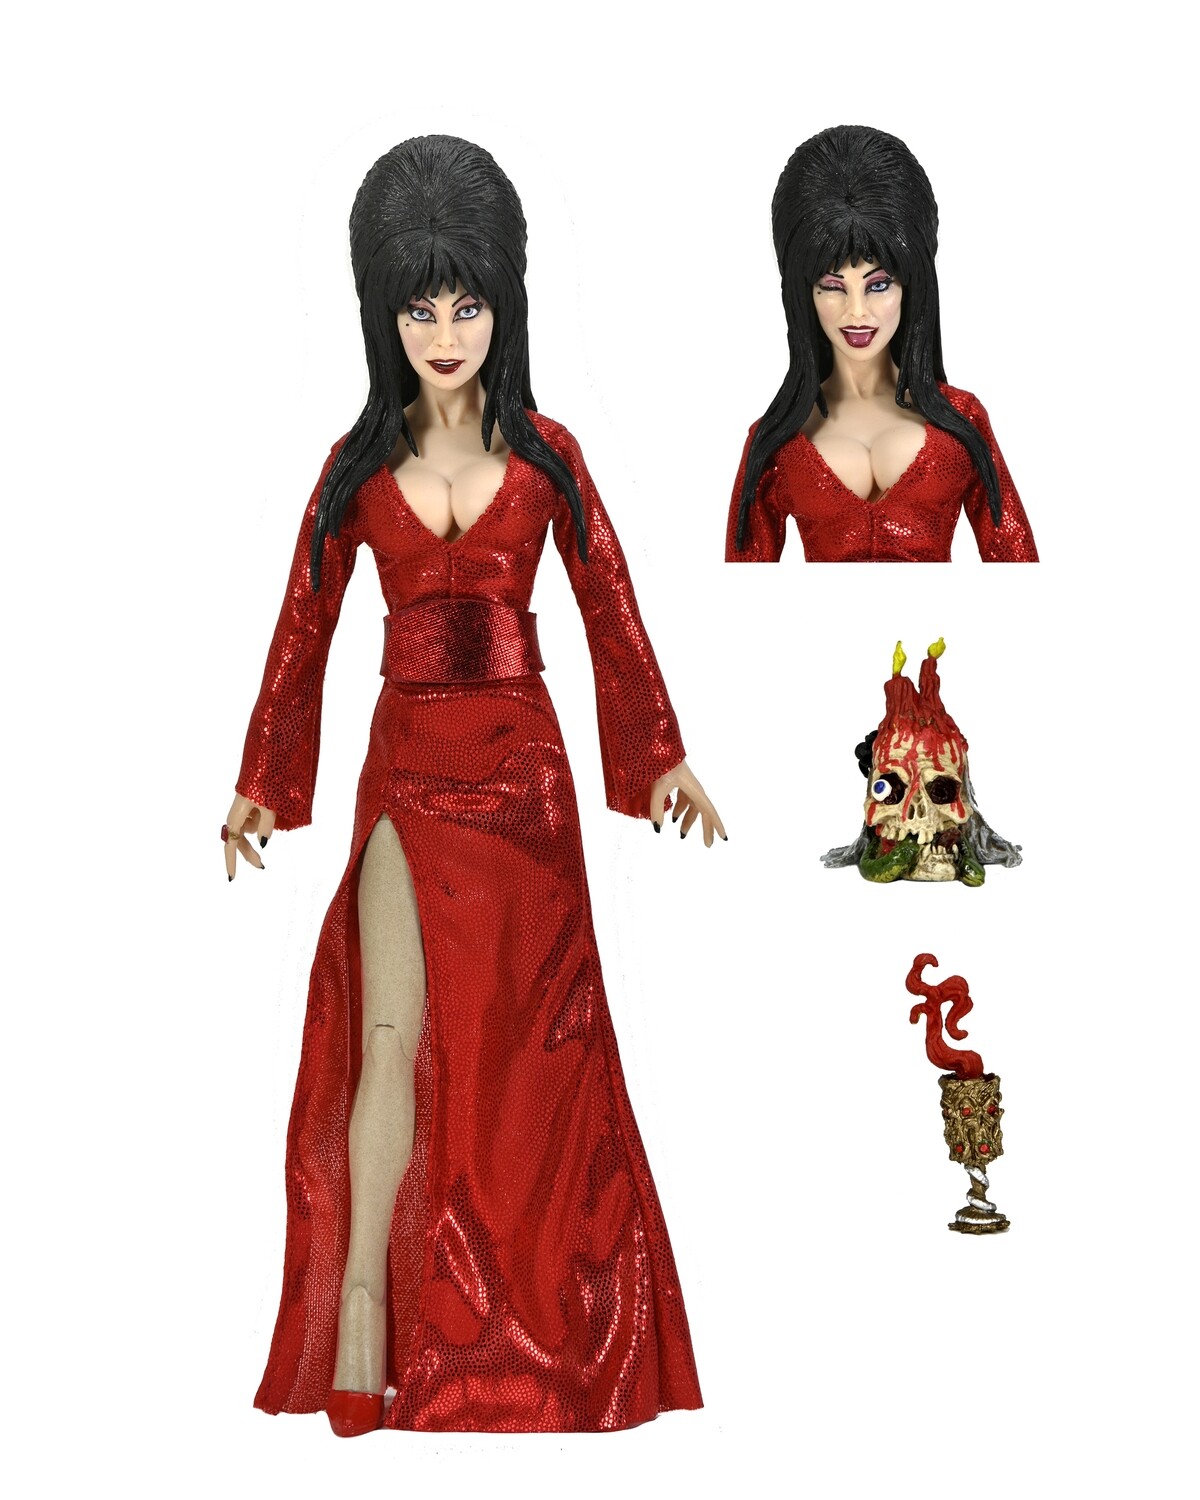 PRE-ORDER NECA Elvira "Red, Fright and Boo" 8" Clothed Action Figure